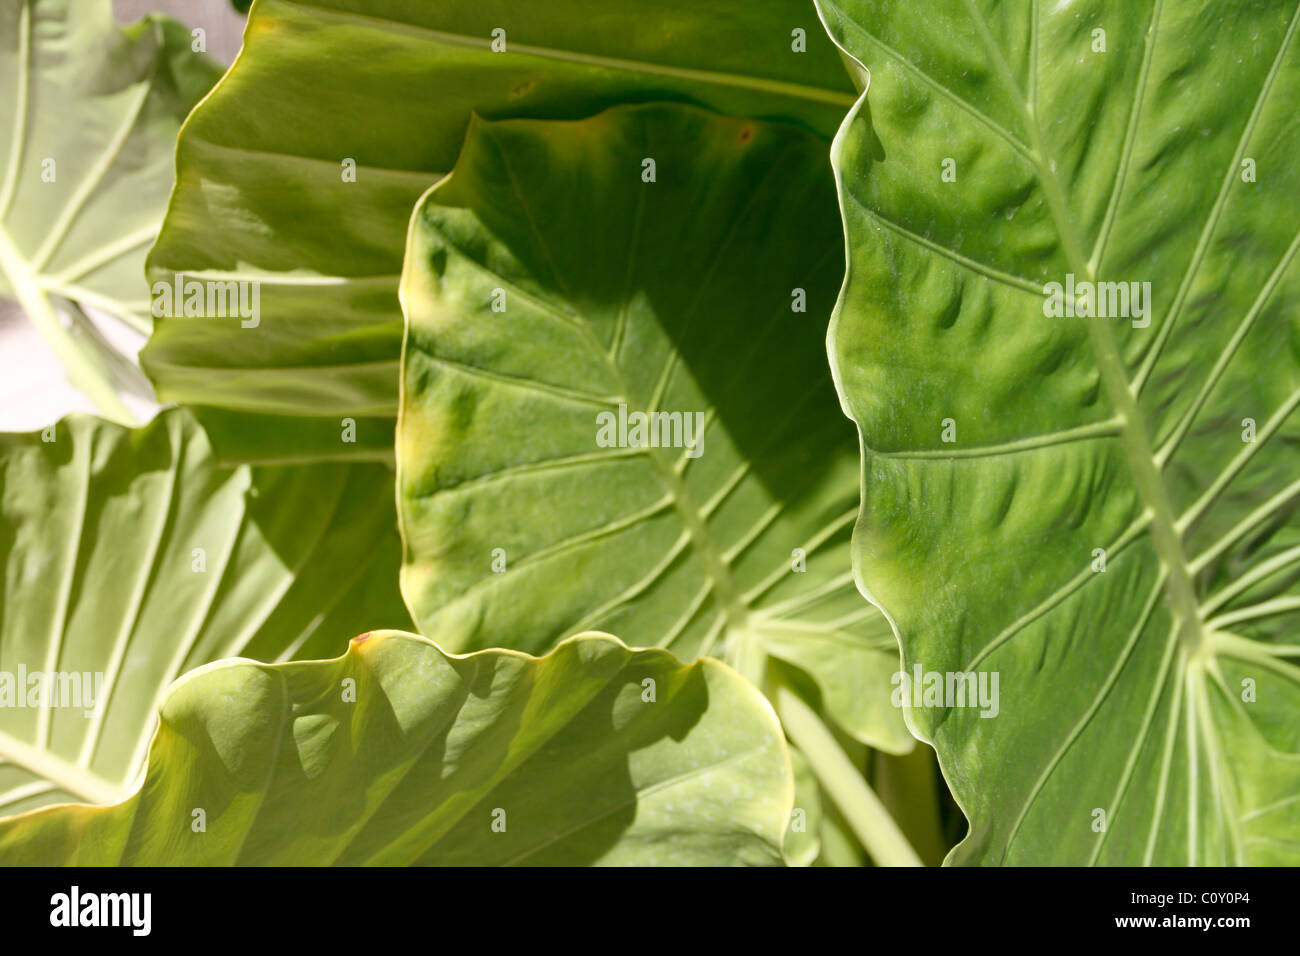 detail of big green tropical leaf plant in garden Stock Photo